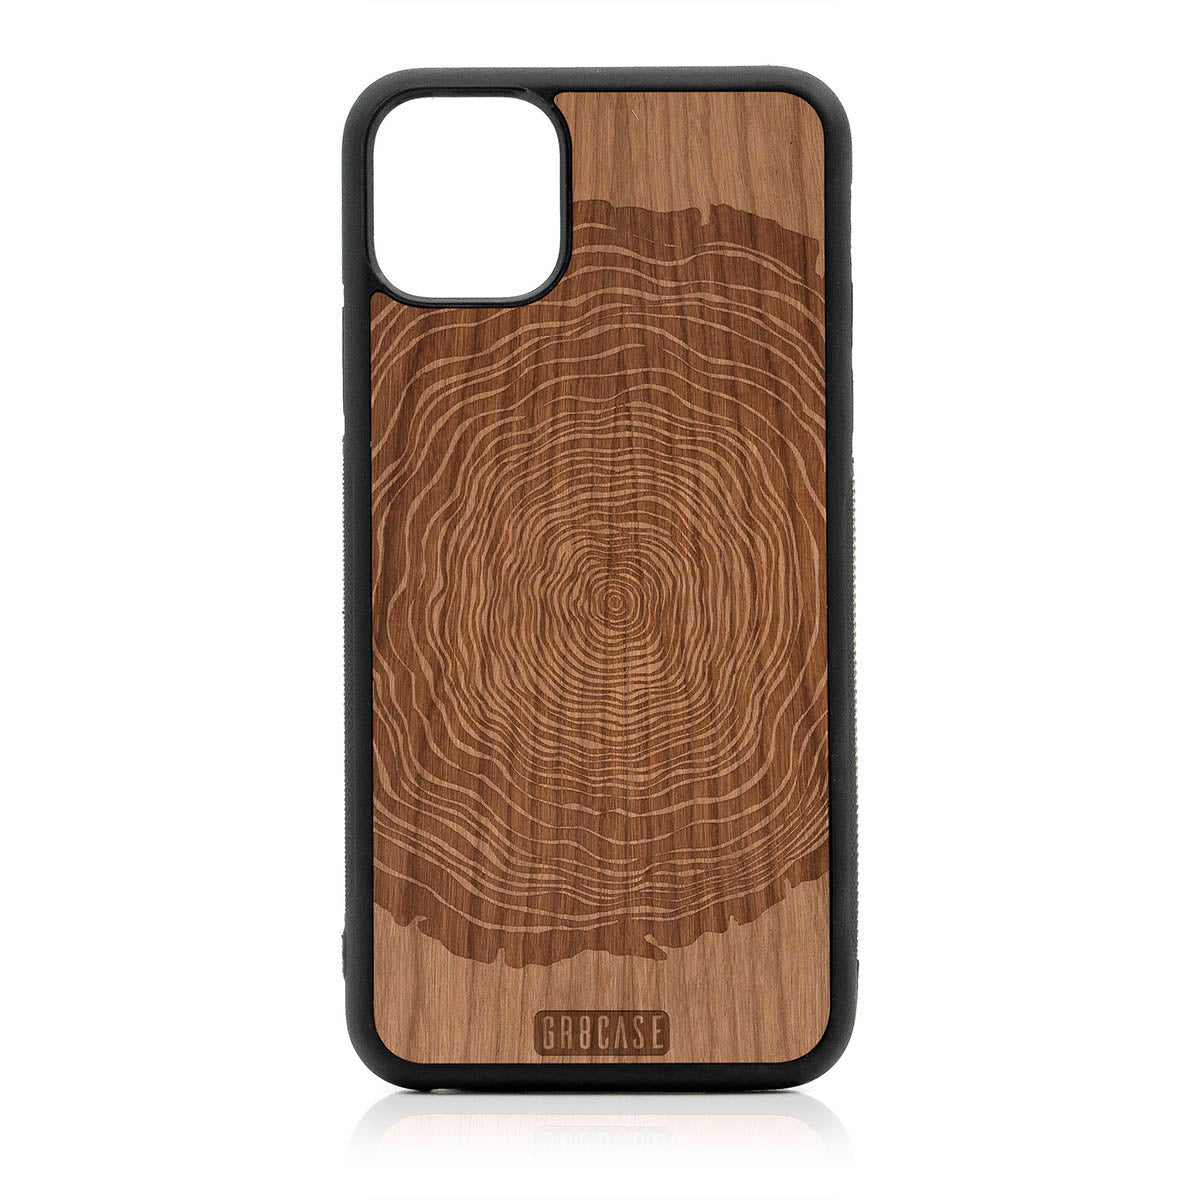 Tree Rings Design Wood Case For iPhone 11 Pro Max